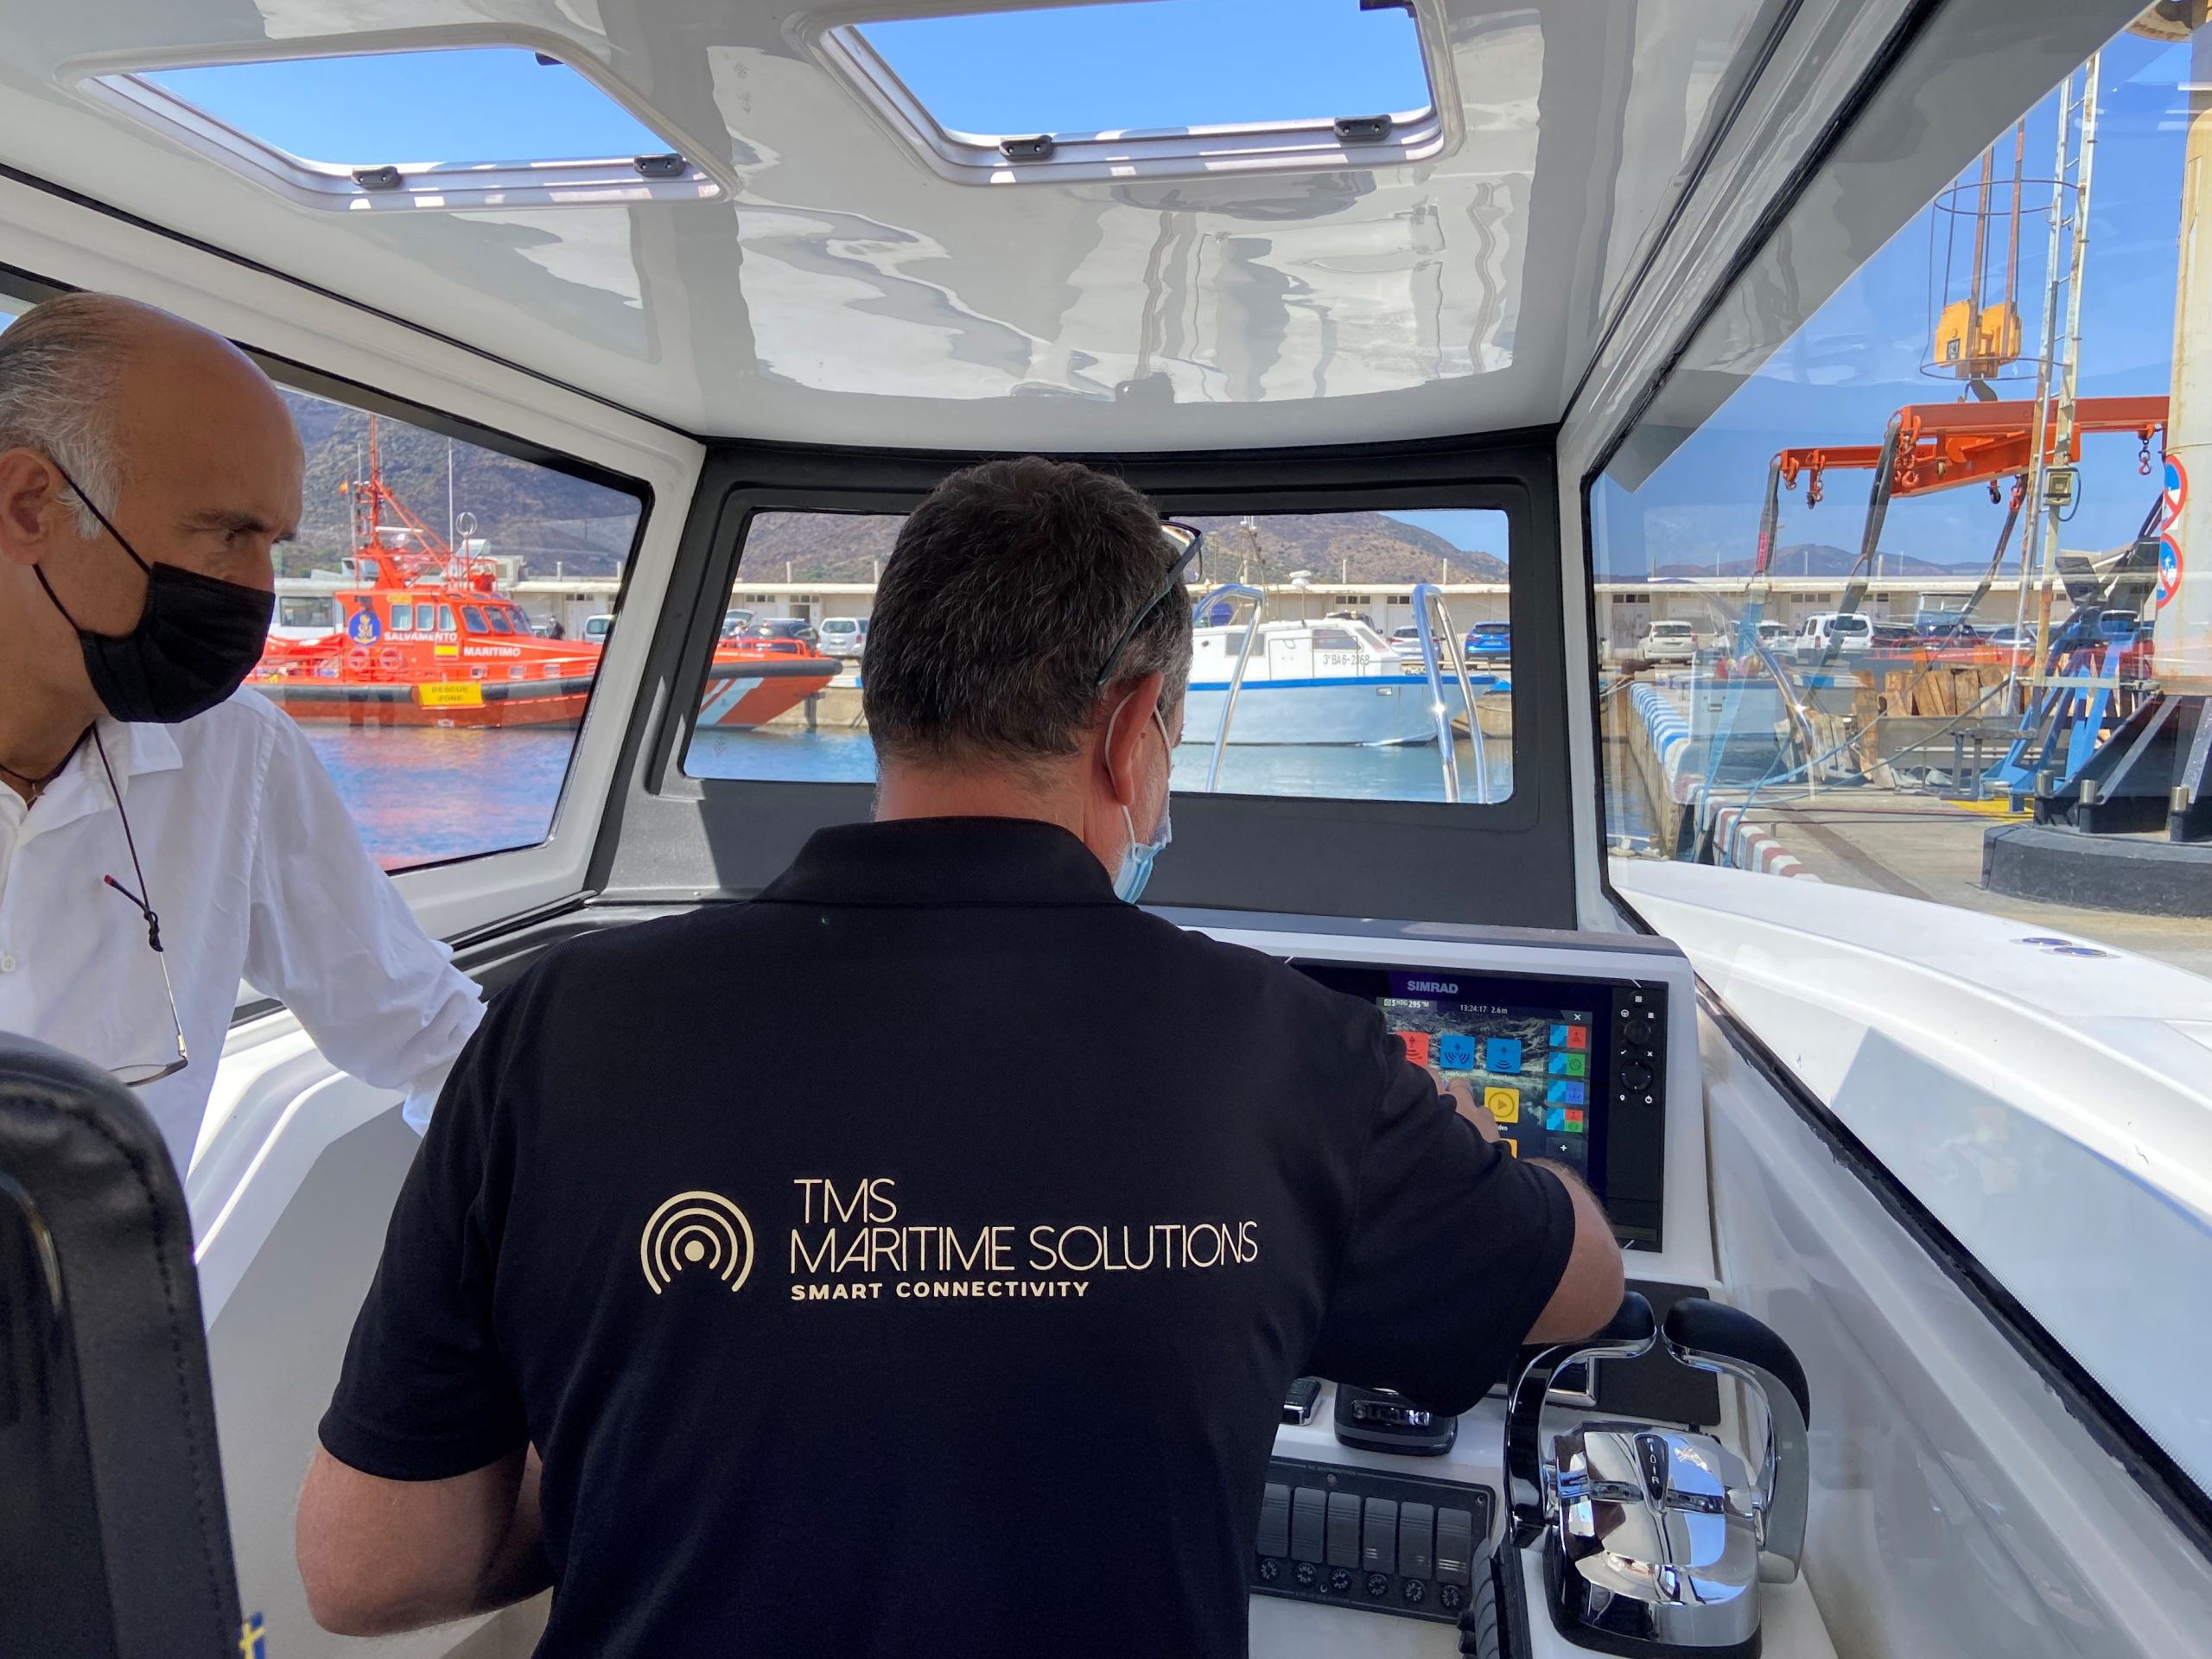 TMS Maritime Solutions